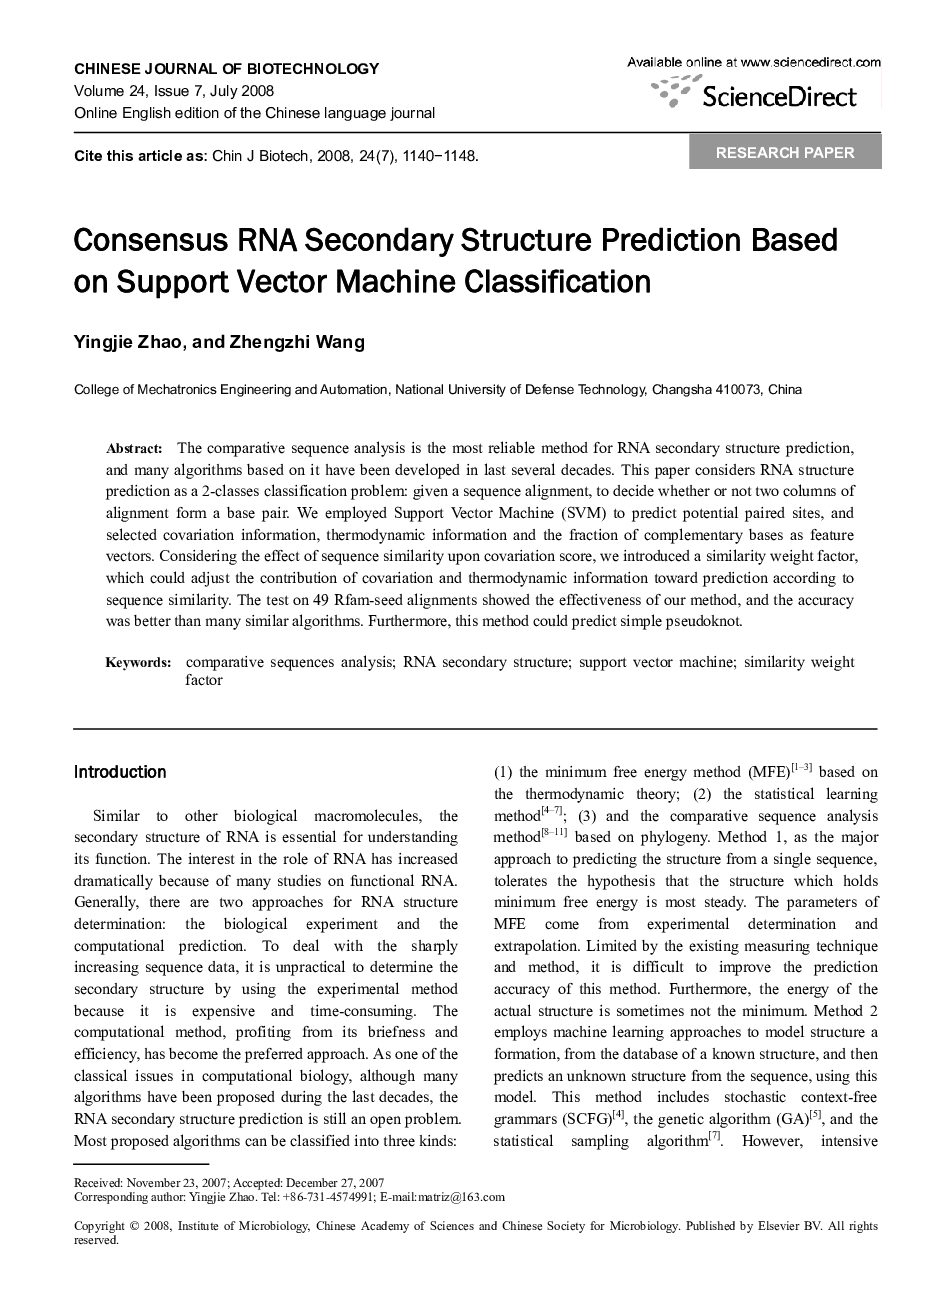 Consensus RNA Secondary Structure Prediction Based on Support Vector Machine Classification